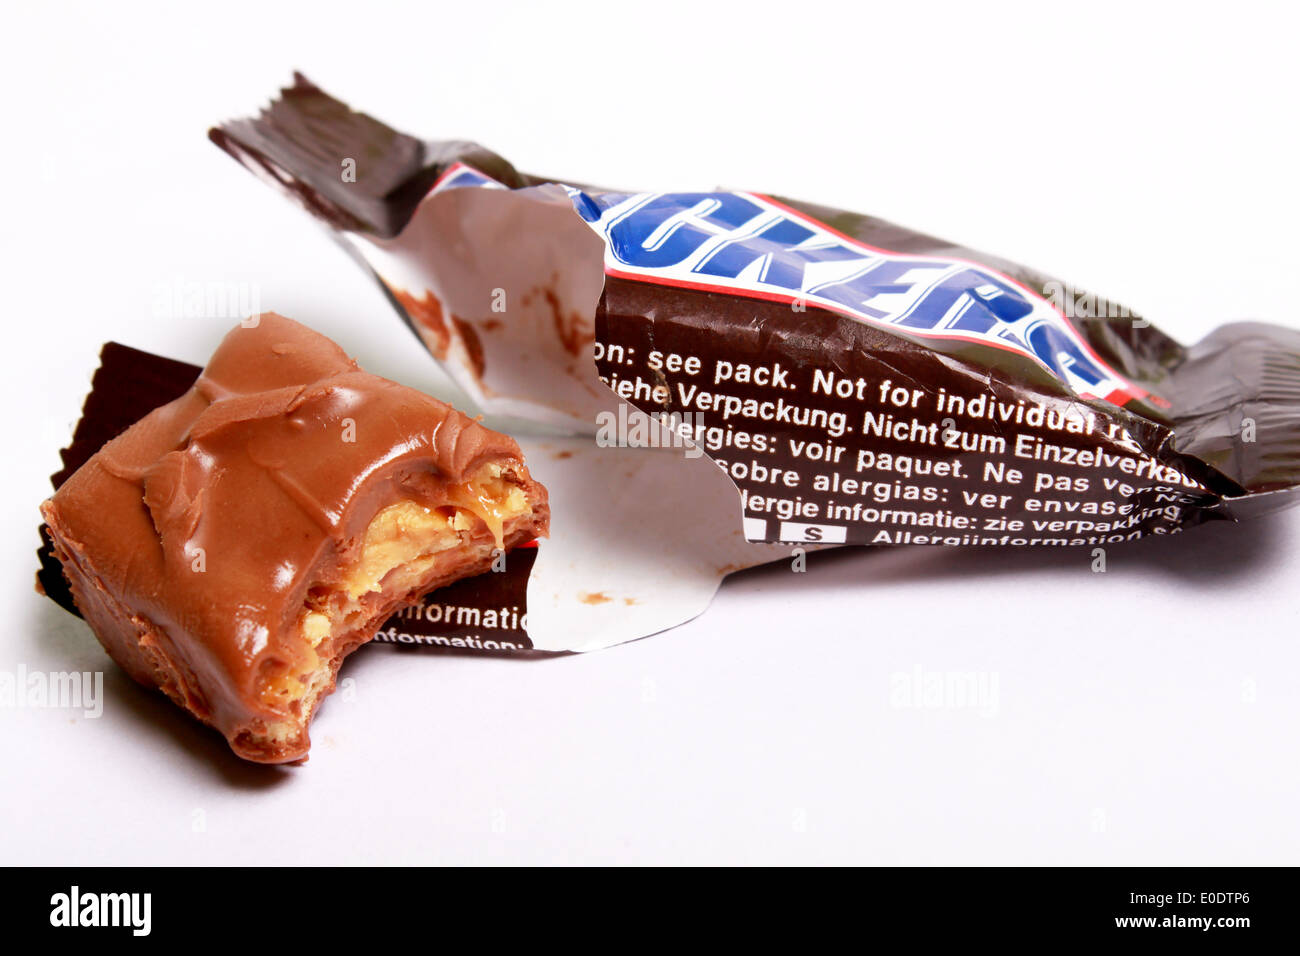 snickers chocolate bar in wrapper Stock Photo